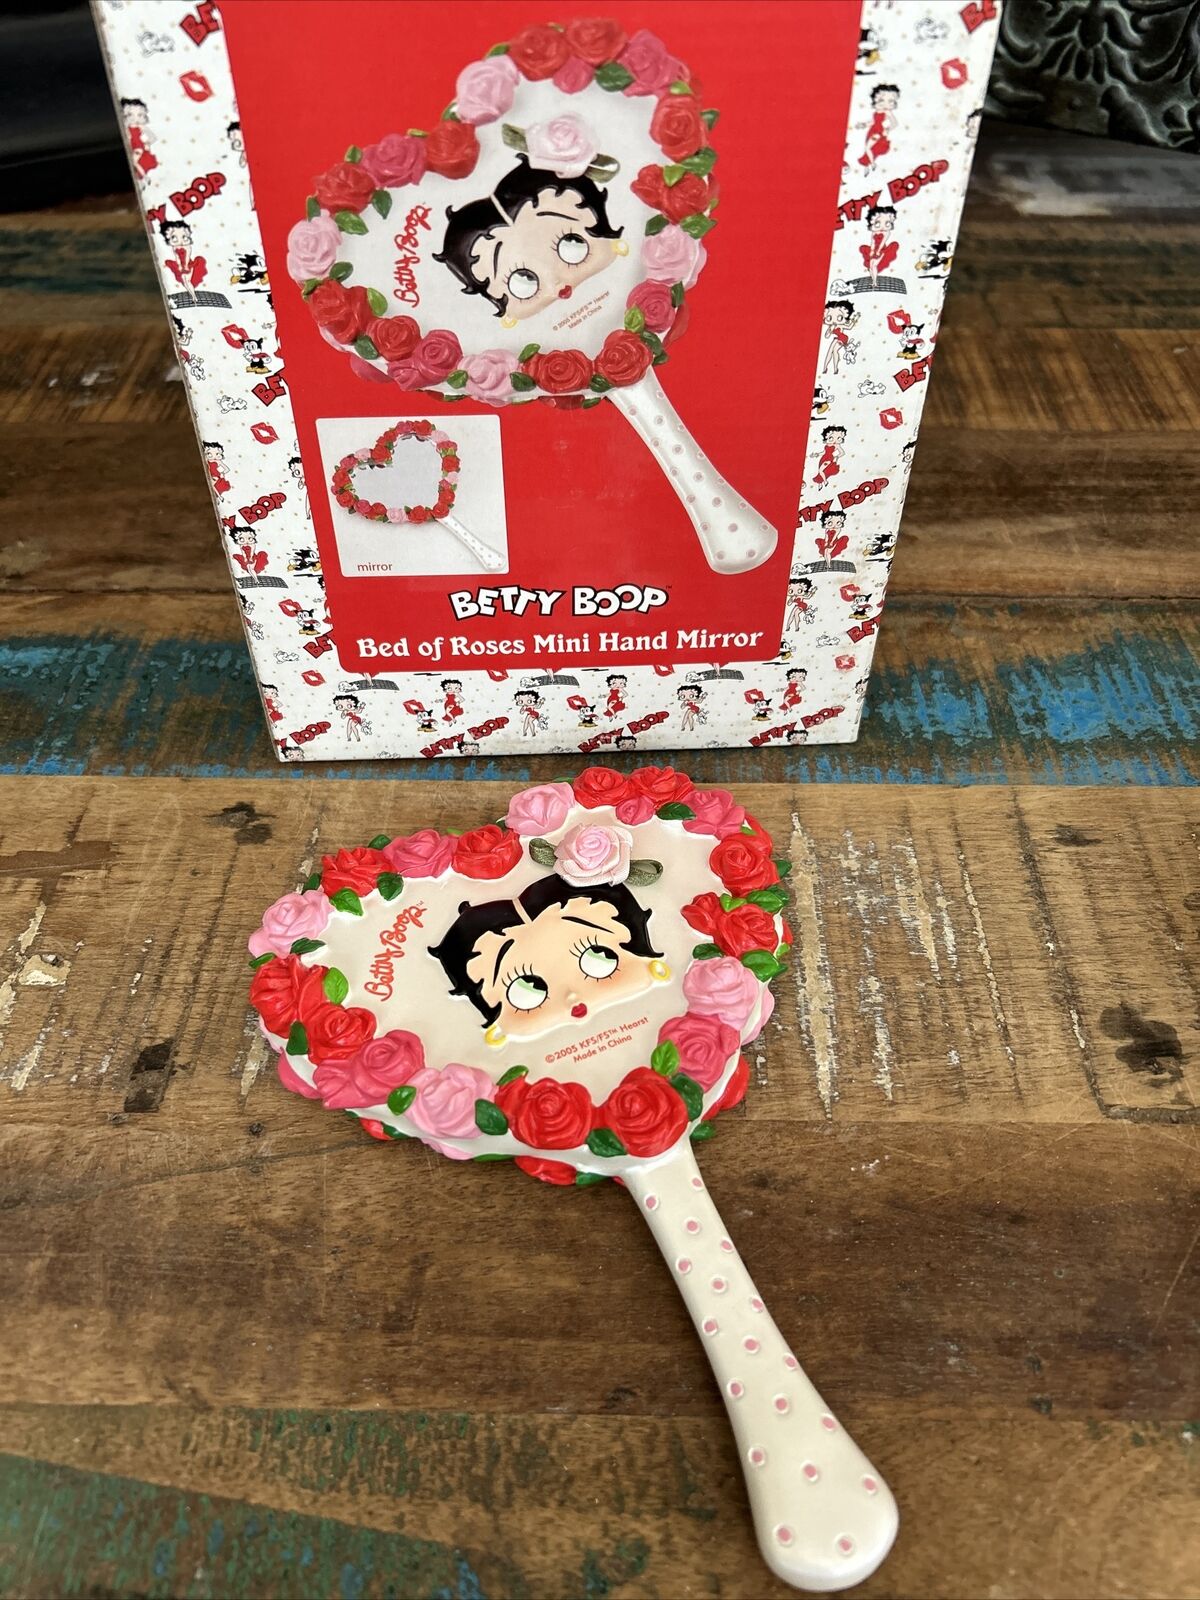 2005 Betty Boop Bed Of Roses Hand Mirror Vandor Too Cute New In Box NOS